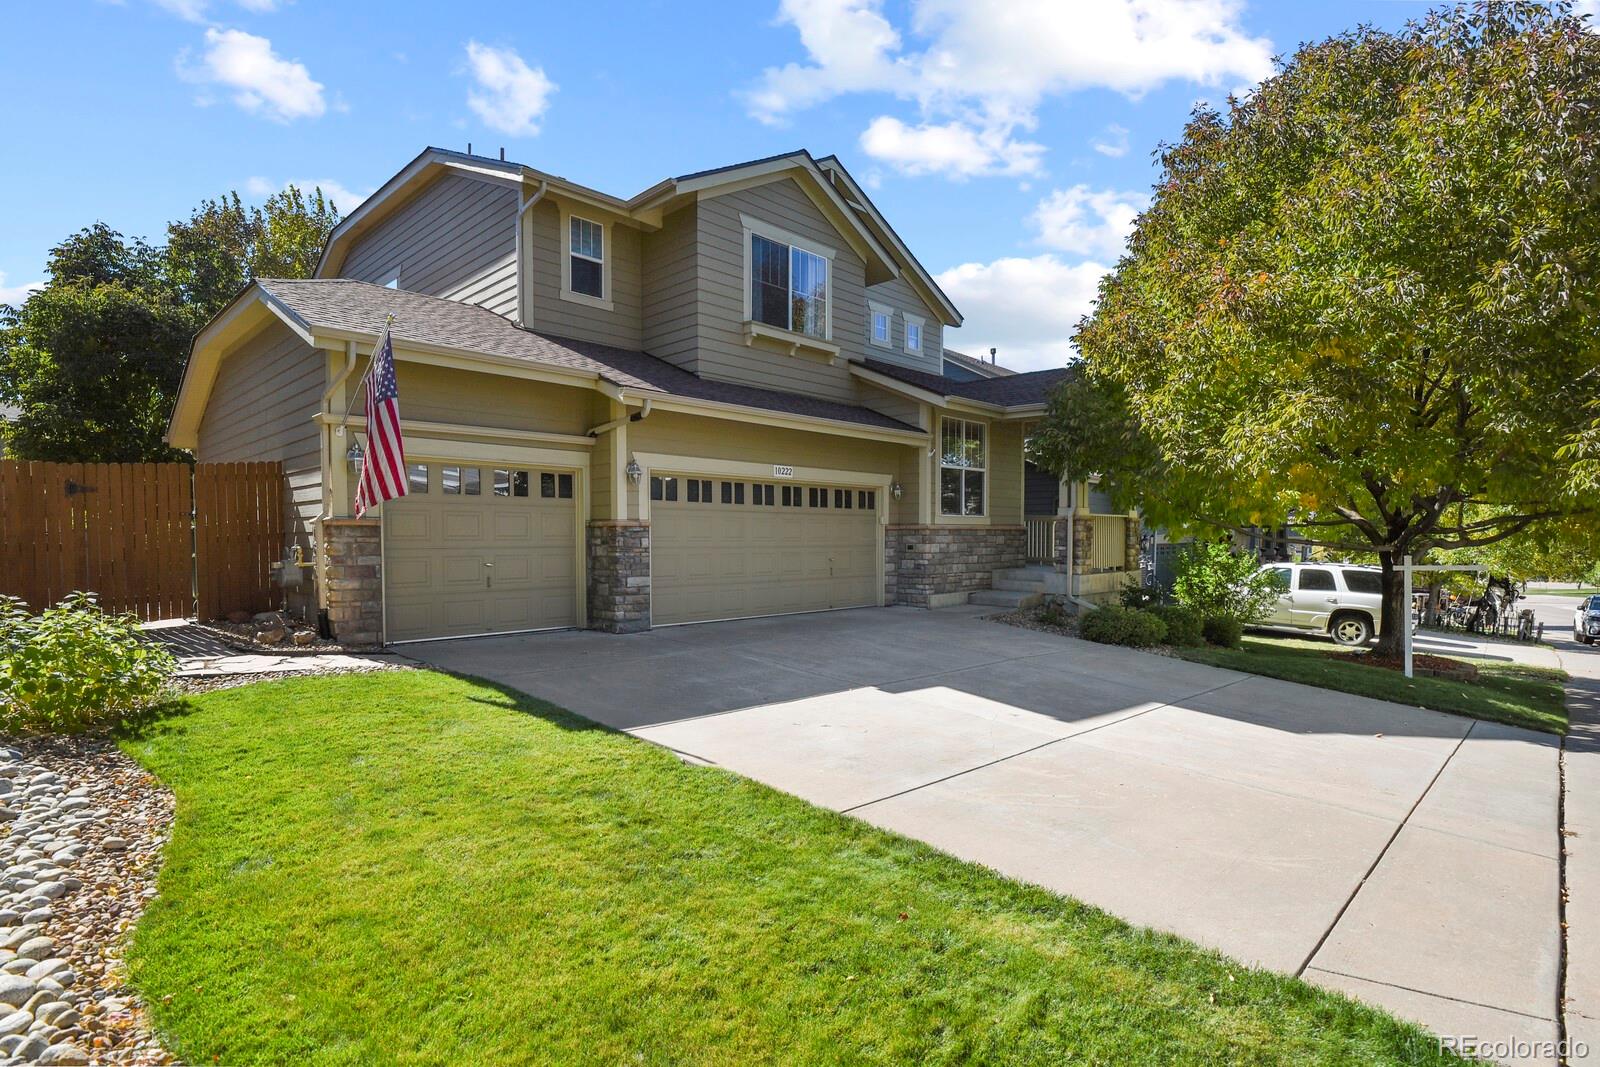 10222  cavaletti drive, Littleton sold home. Closed on 2024-02-29 for $715,500.